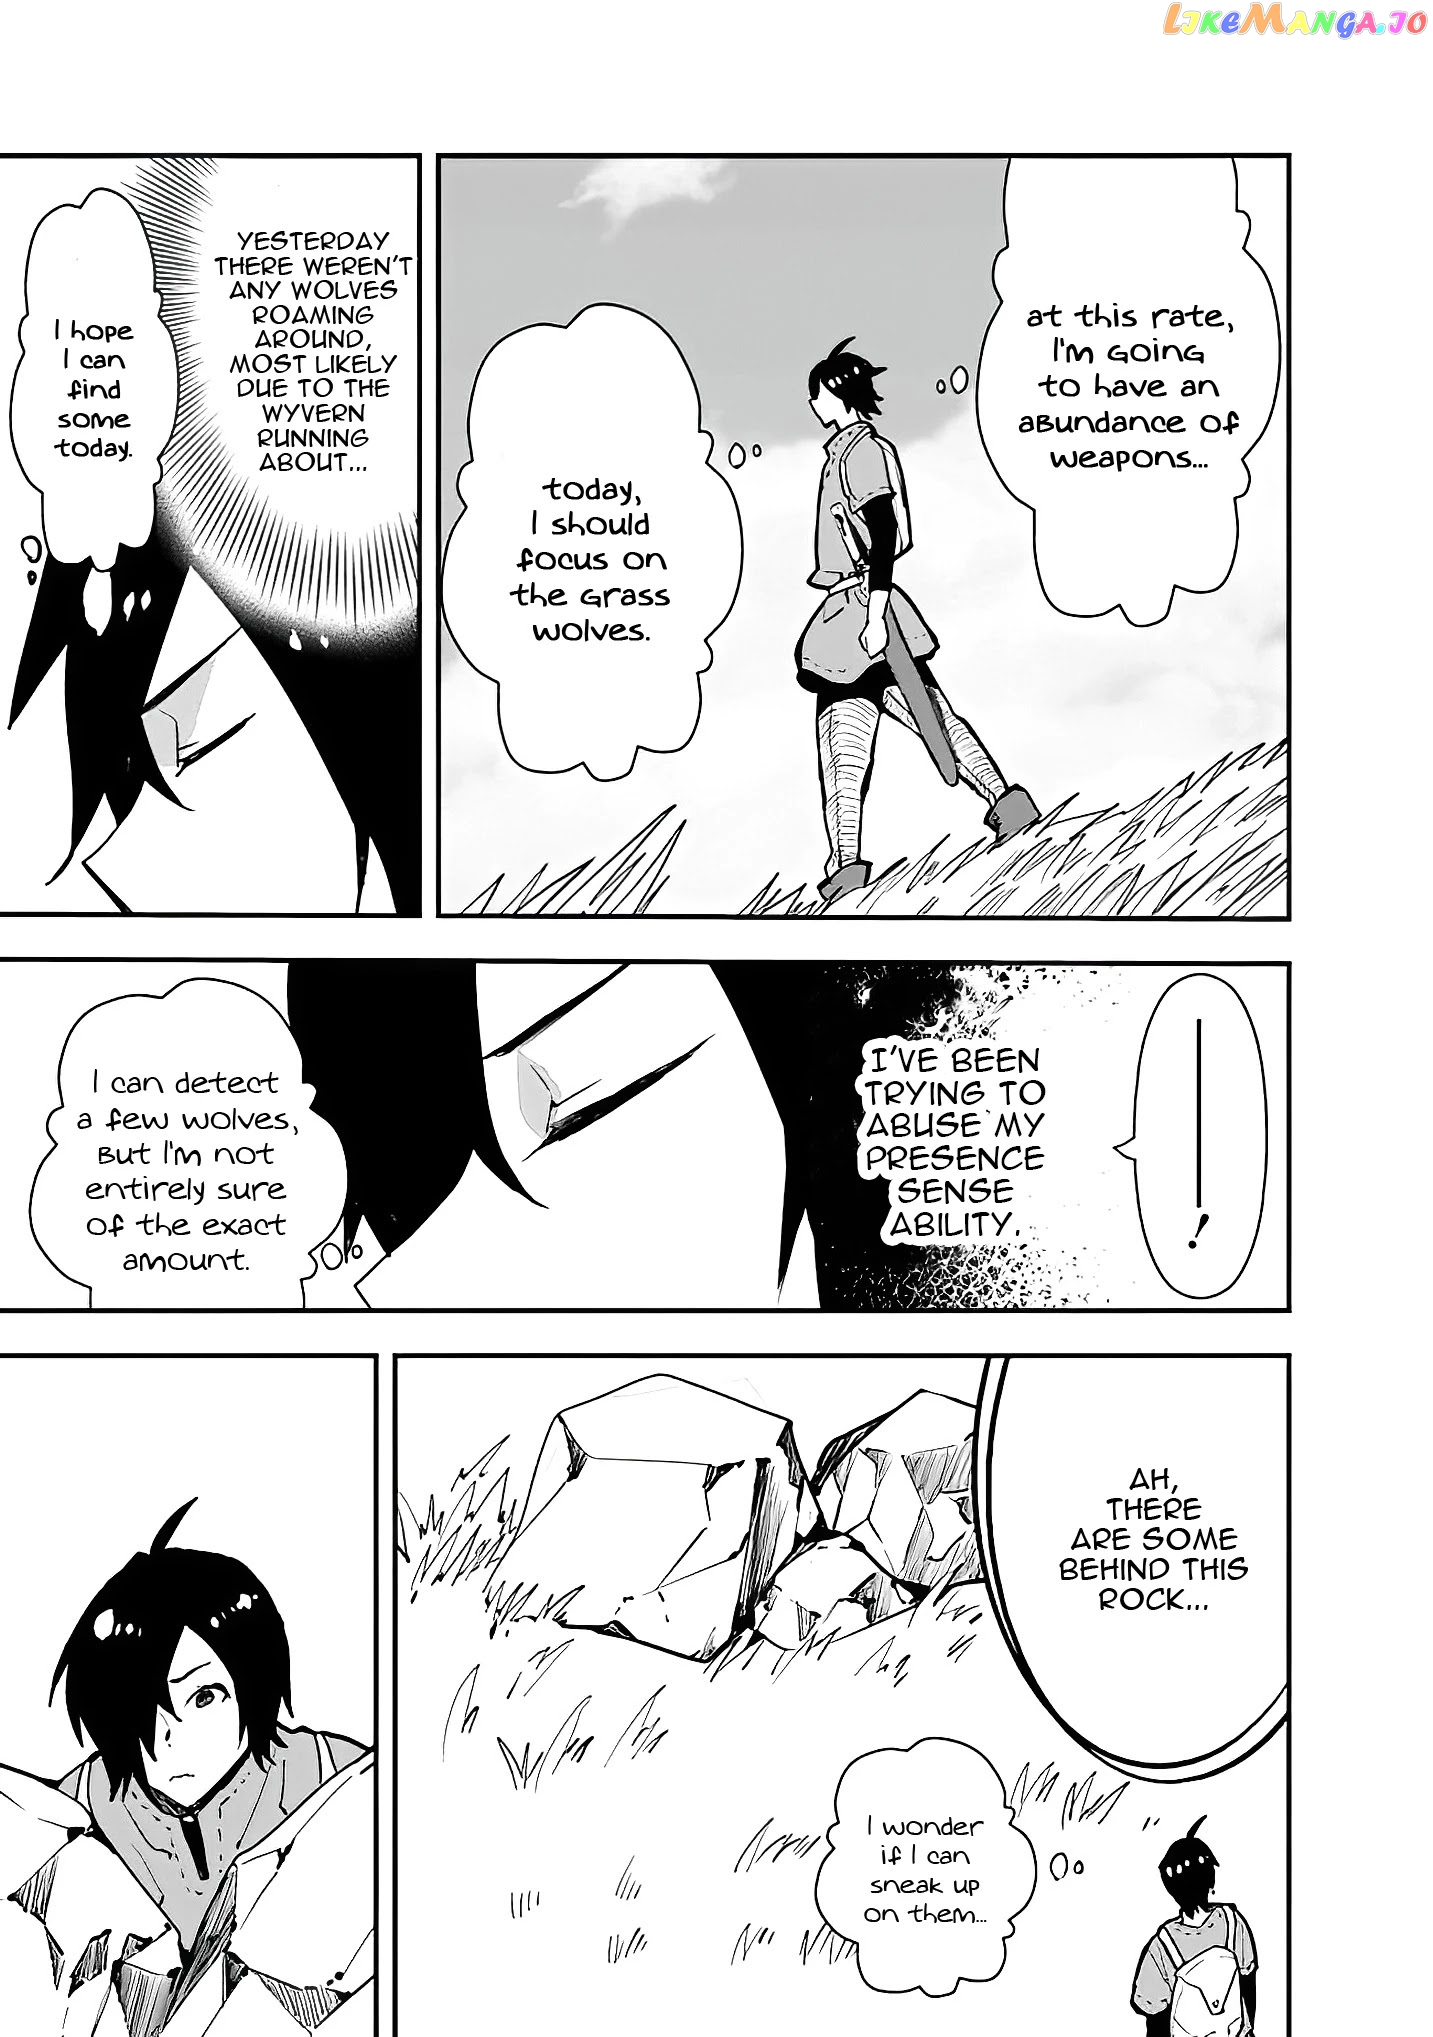 I Came To Another World As A Jack Of All Trades And A Master Of None To Journey While Relying On Quickness chapter 23 - page 6